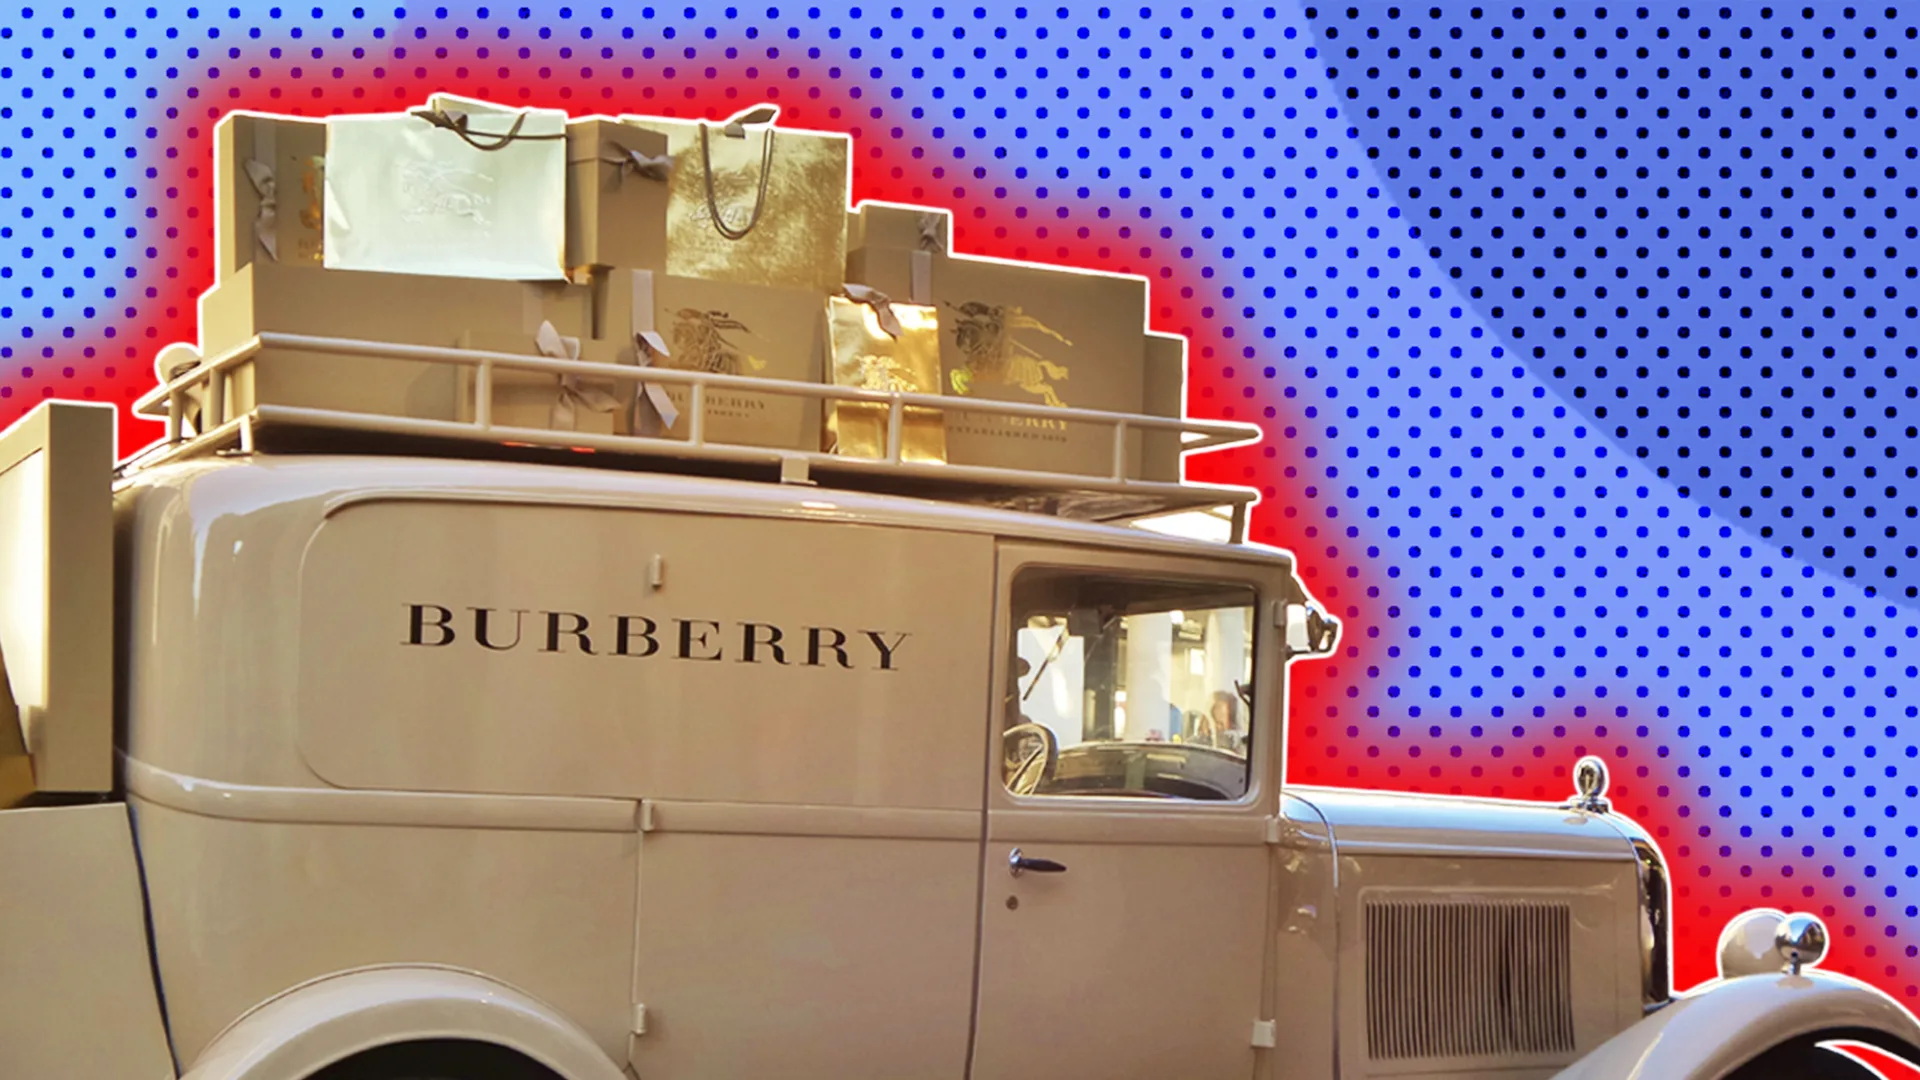 A Burberry van with a polkadot background and a glow around the image